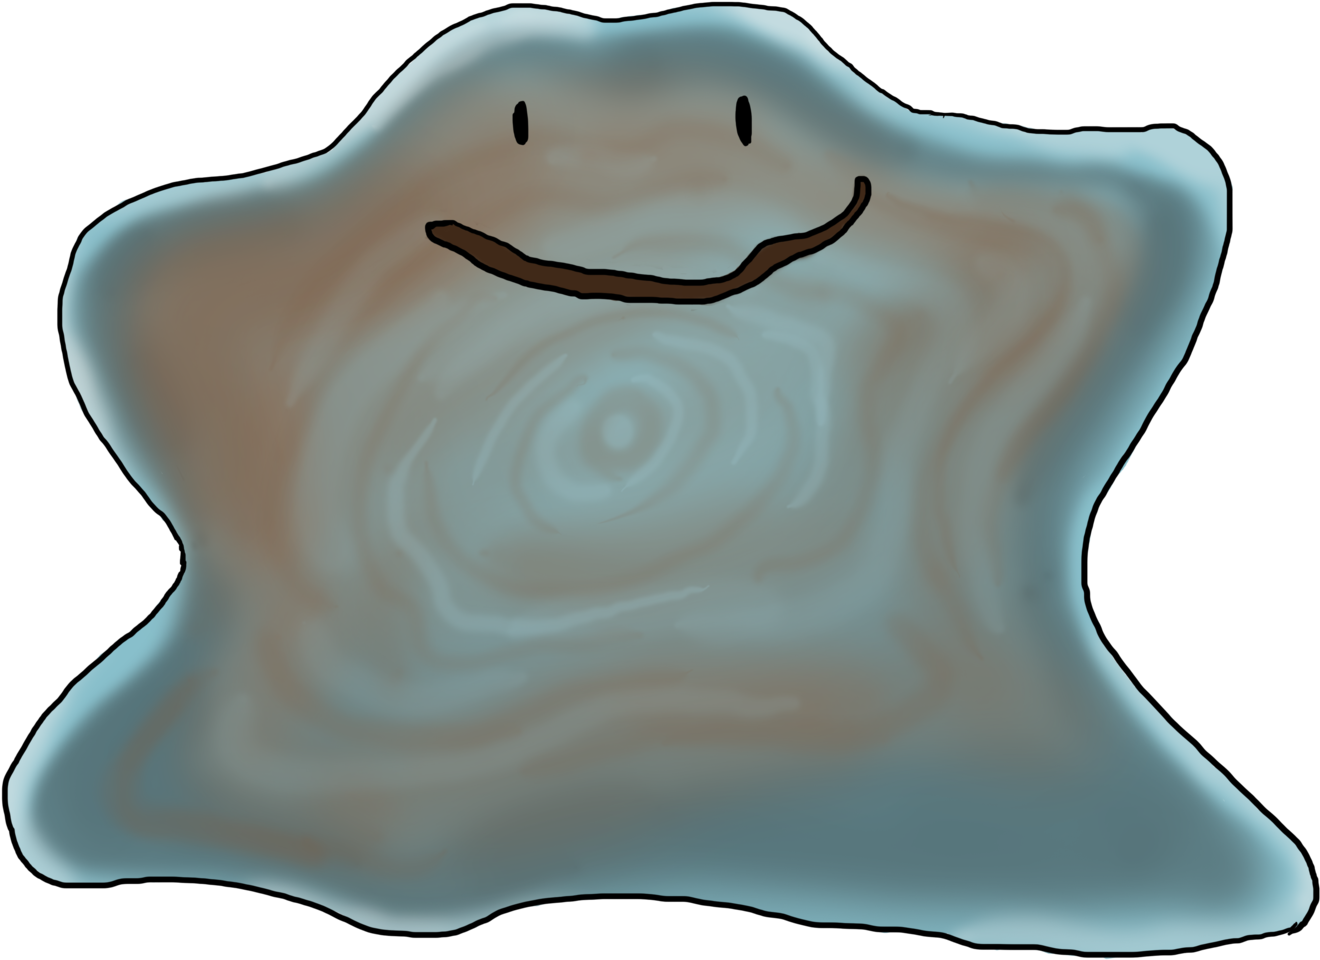 Download and share clipart about Mud Puddle Ditto By Pokemontrainerhail - I...